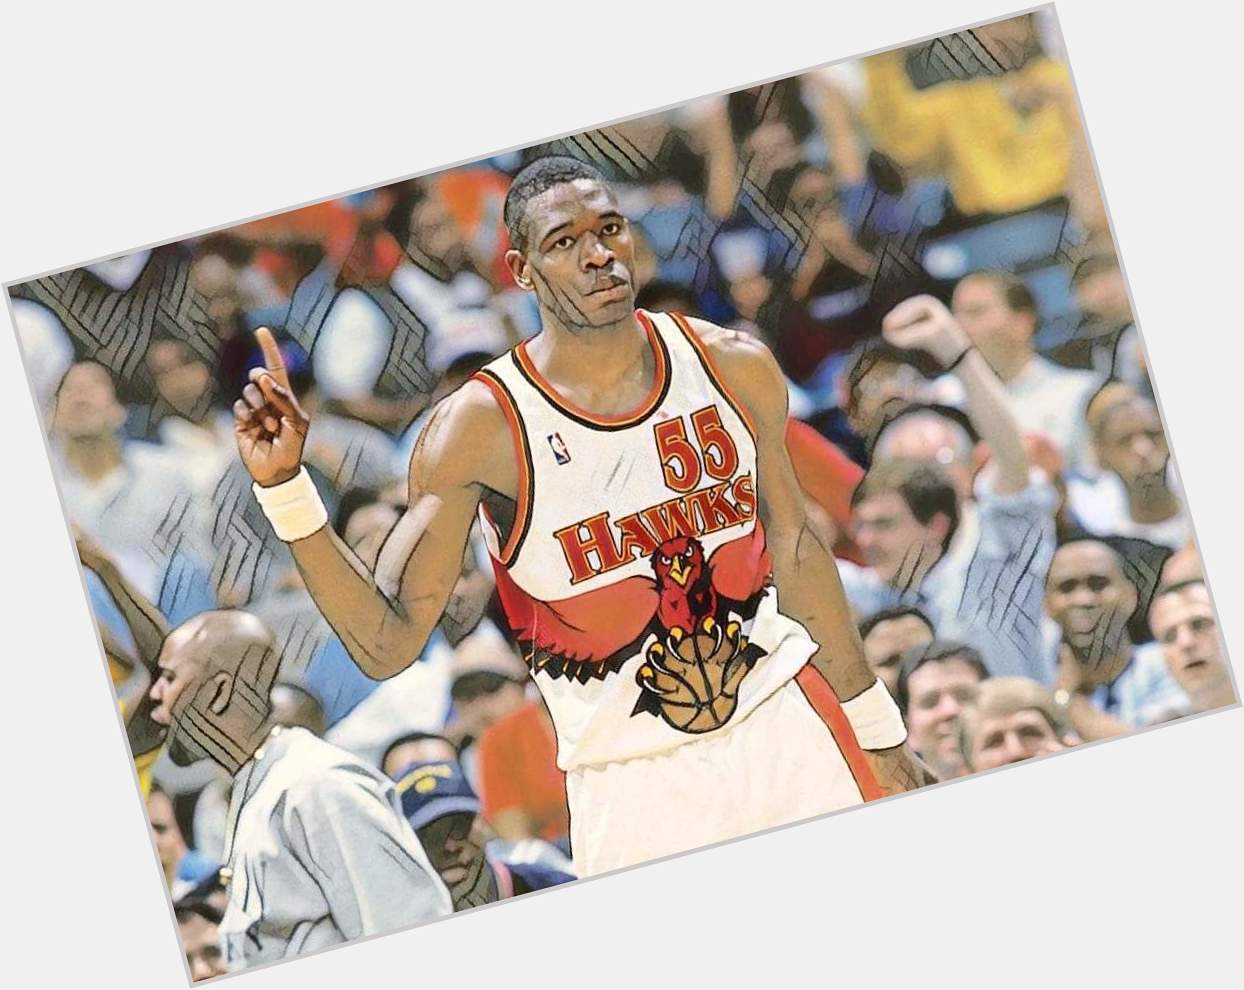 Happy Birthday to Dikembe mutombo I\m glad he is in 2k 